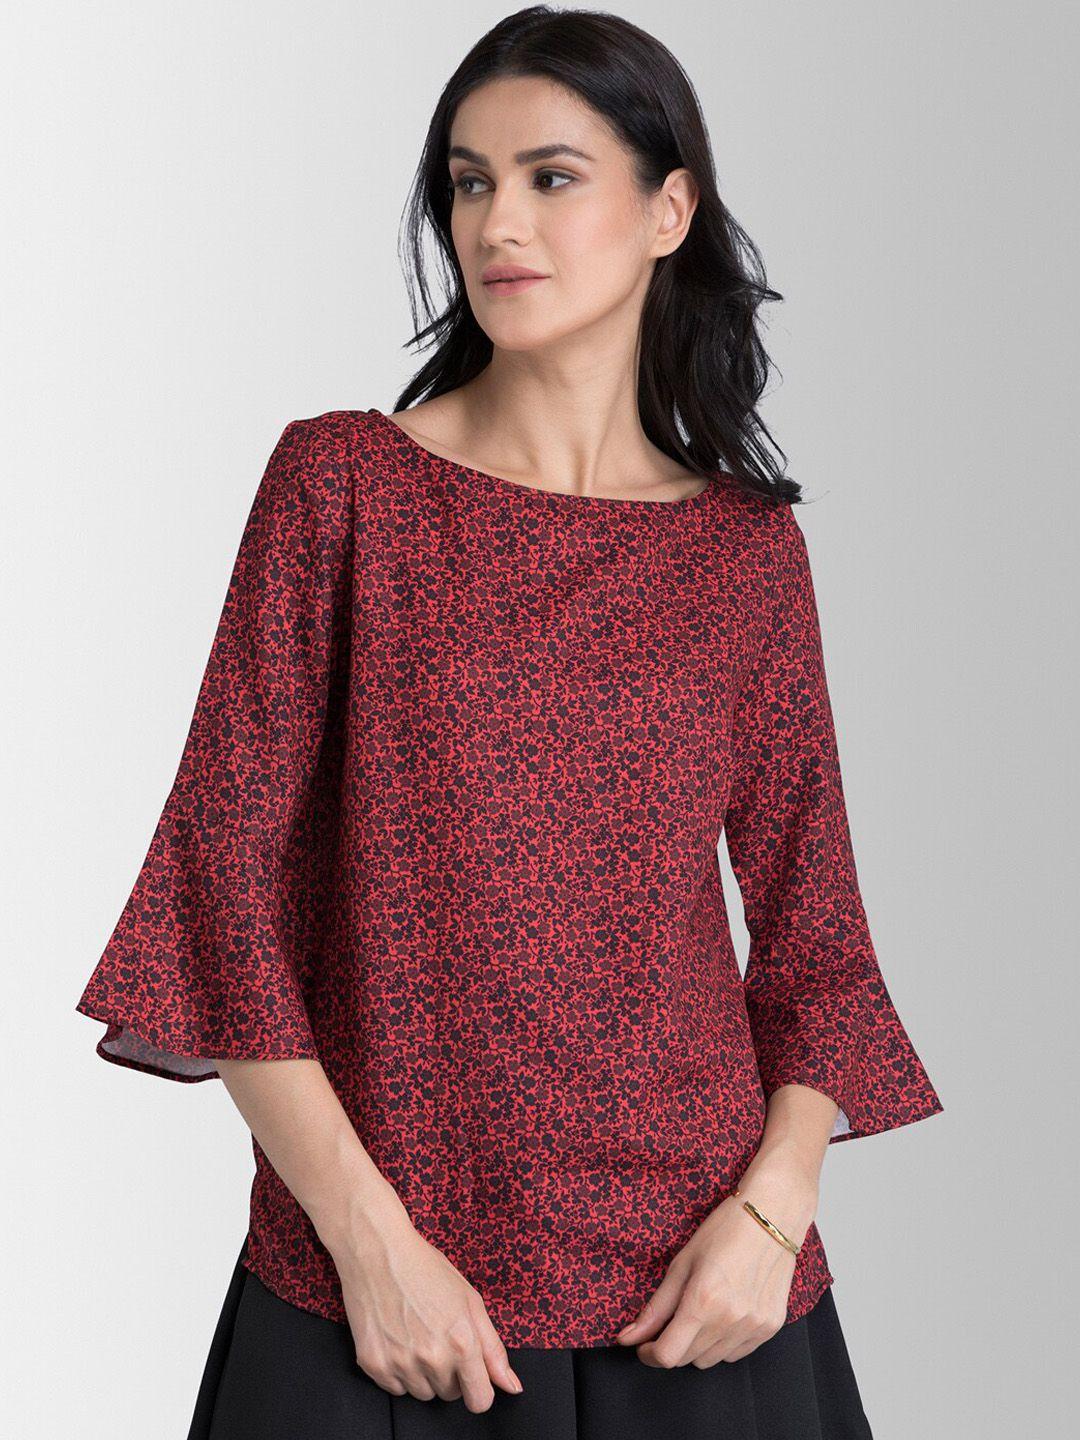 fablestreet women red & black micro floral printed top